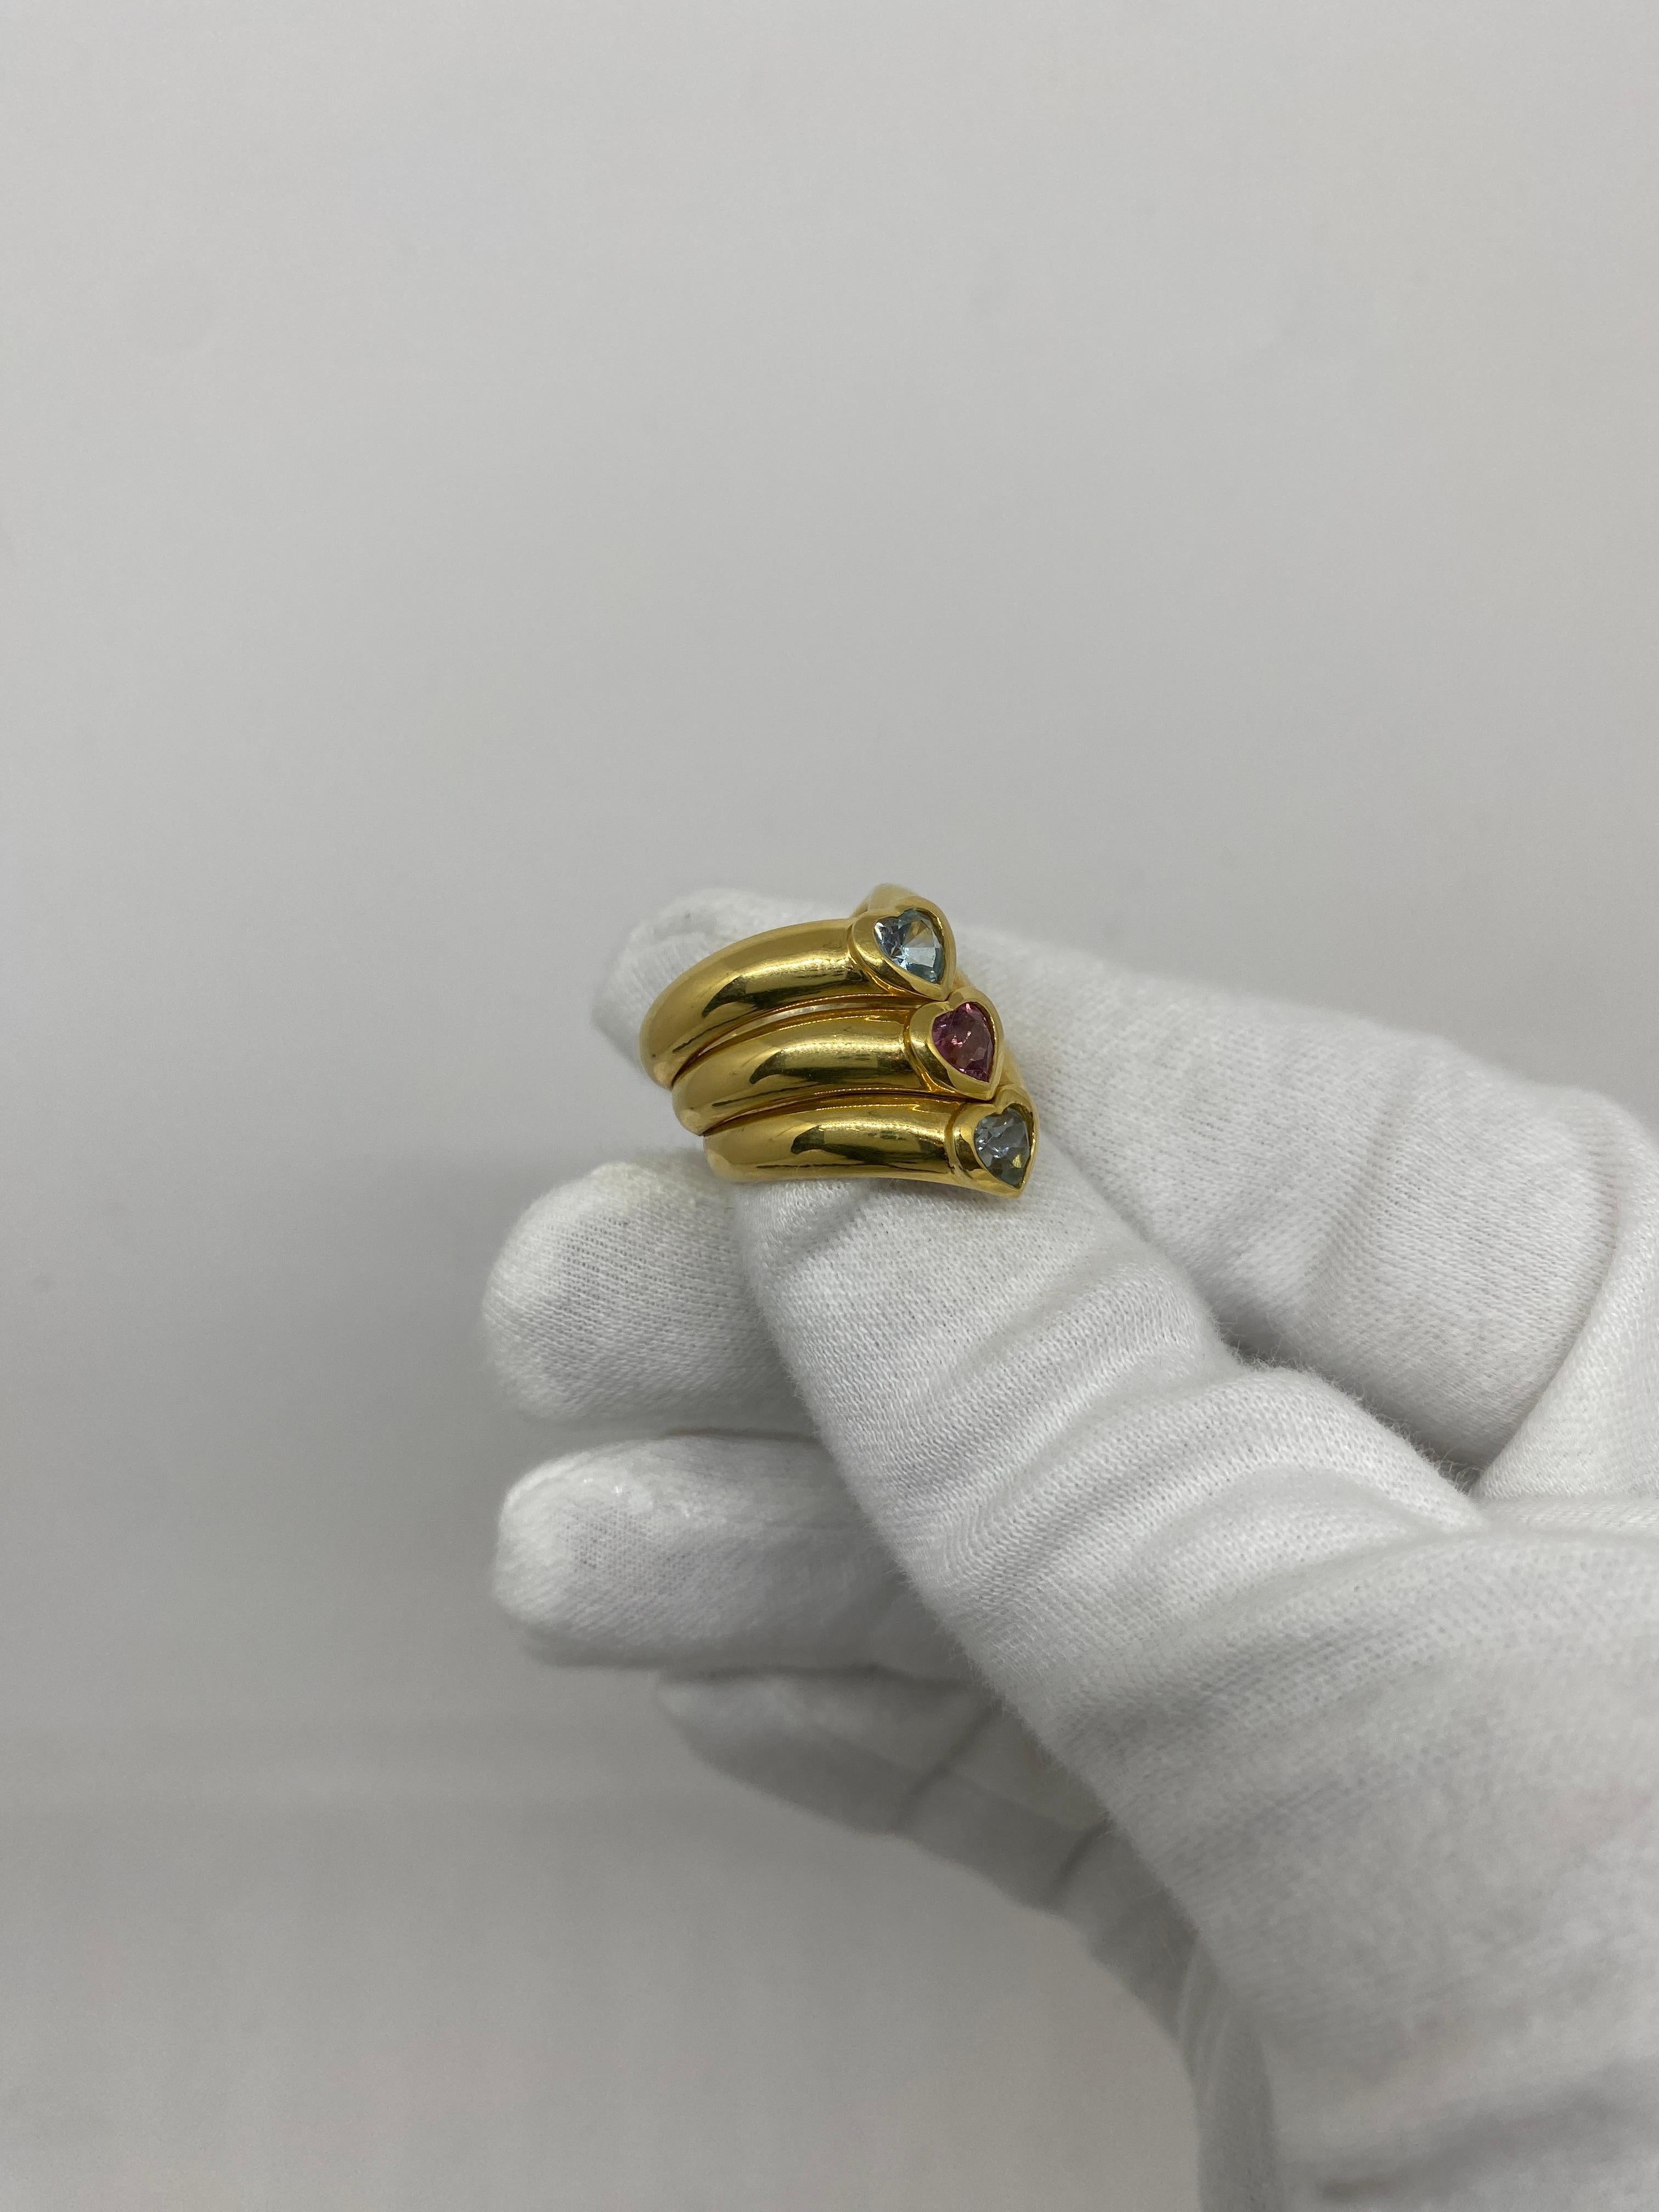 Ring made of 18 kt yellow gold with heart-cut natural semiprecious stones

Welcome to our jewelry collection, where every piece tells a story of timeless elegance and unparalleled craftsmanship. As a family-run business in Italy for over 100 years,